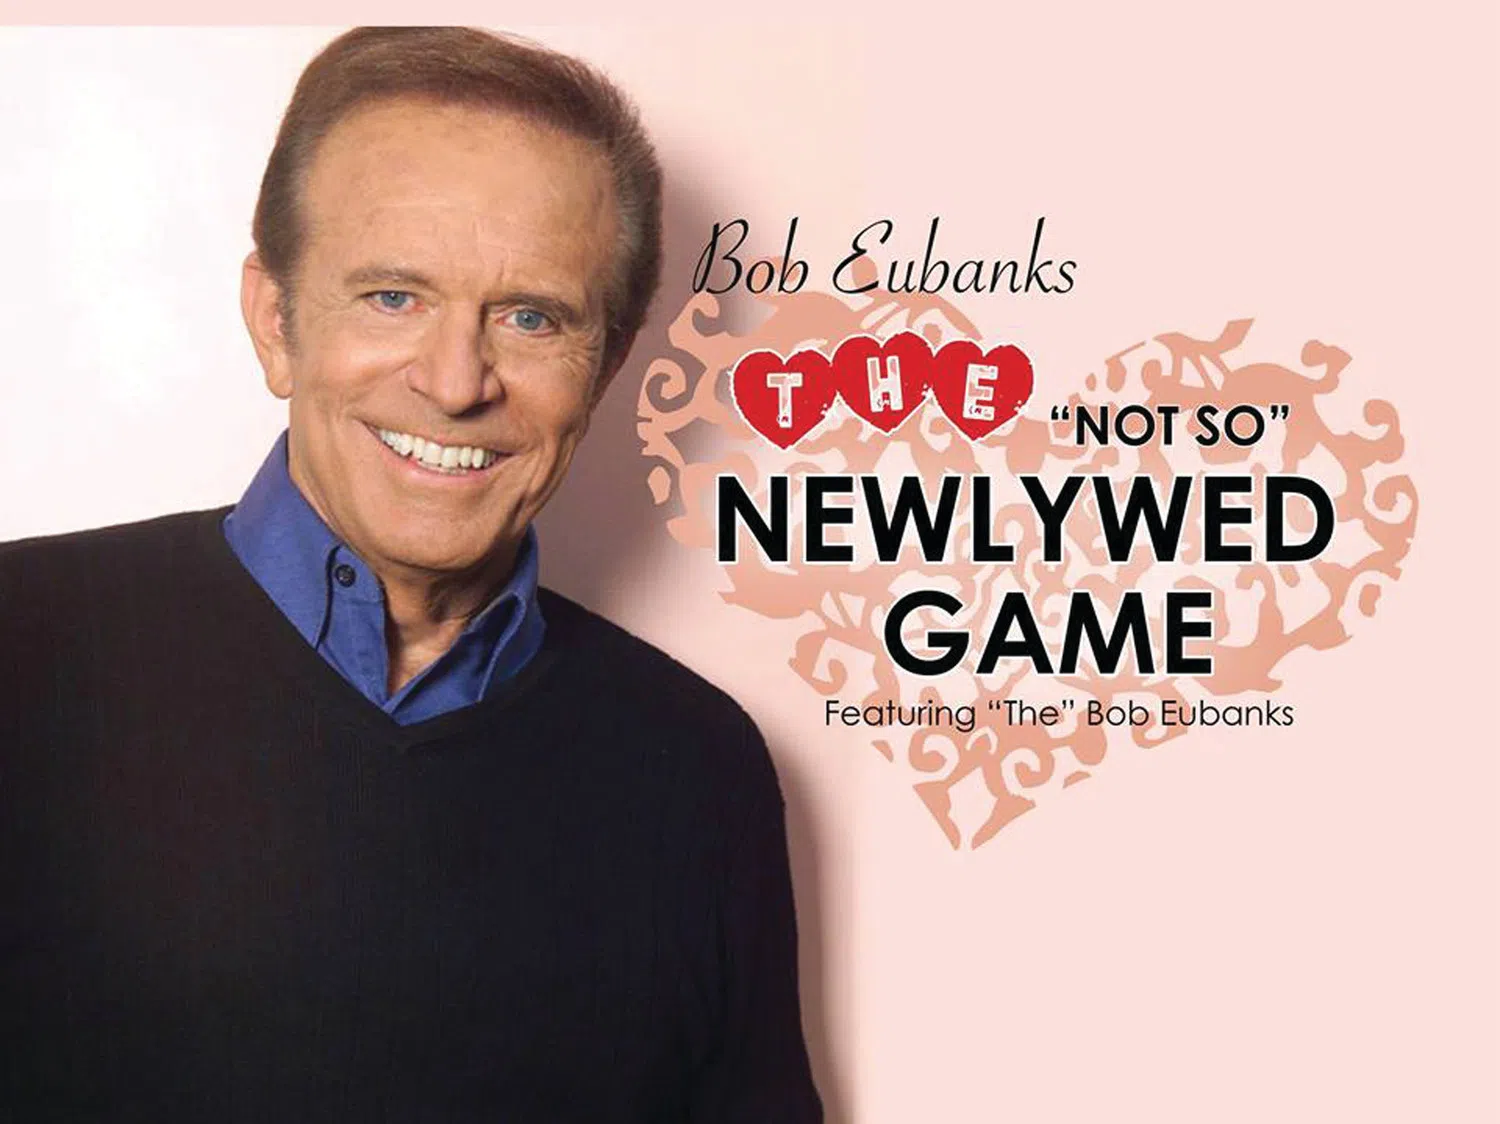 The time when Bob Eubanks celebrated Nestor’s marriage with some Newlywed hijinks